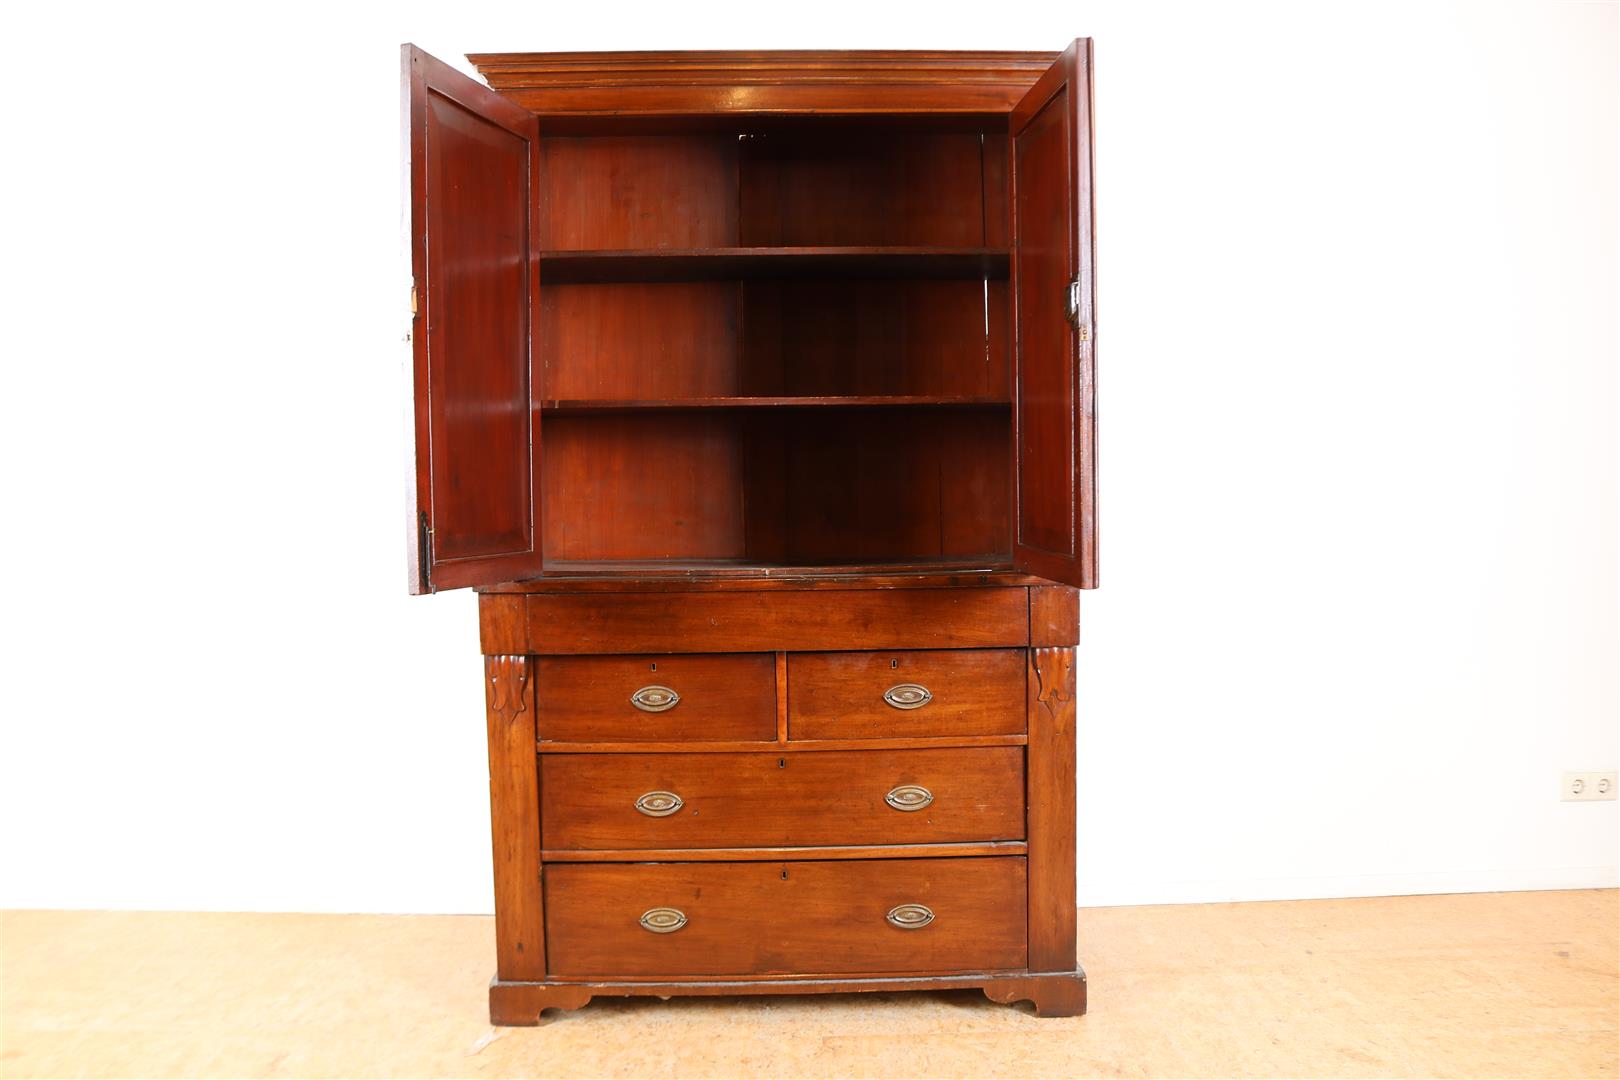 Mahogany cabinet with straight hood, 2 panel doors and 4 drawers, 19th century, 197 x 125 x 52 cm. - Image 2 of 4